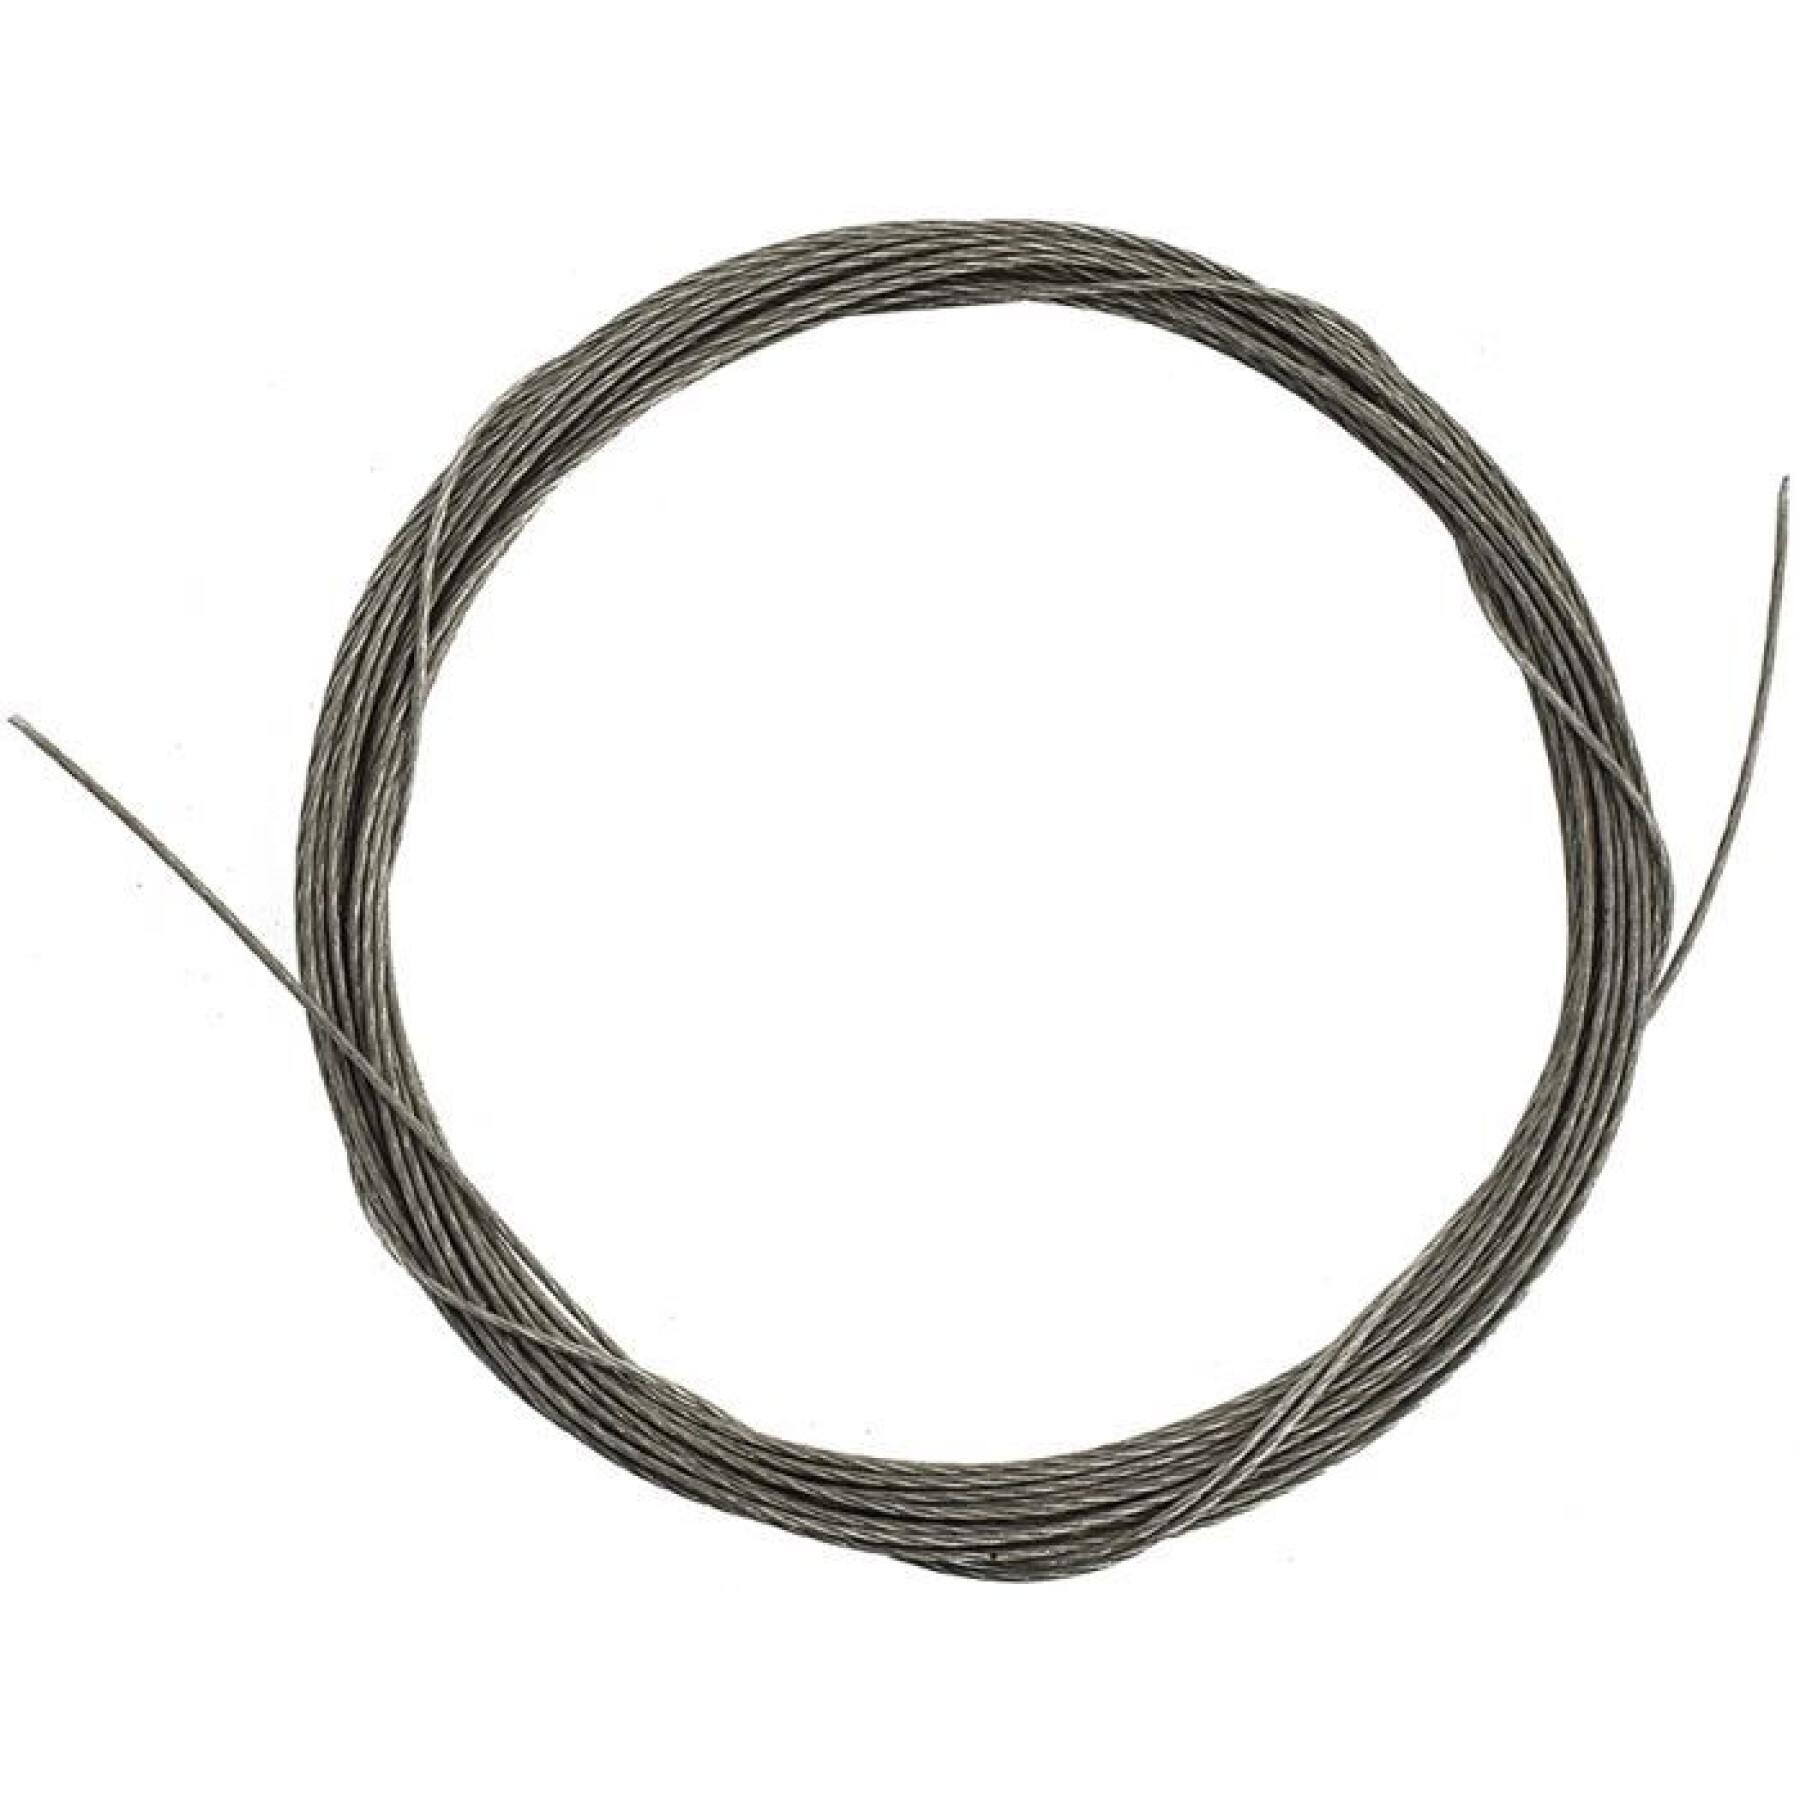 Bottom of the line Decoy Wl 70 N Coated Wire 39